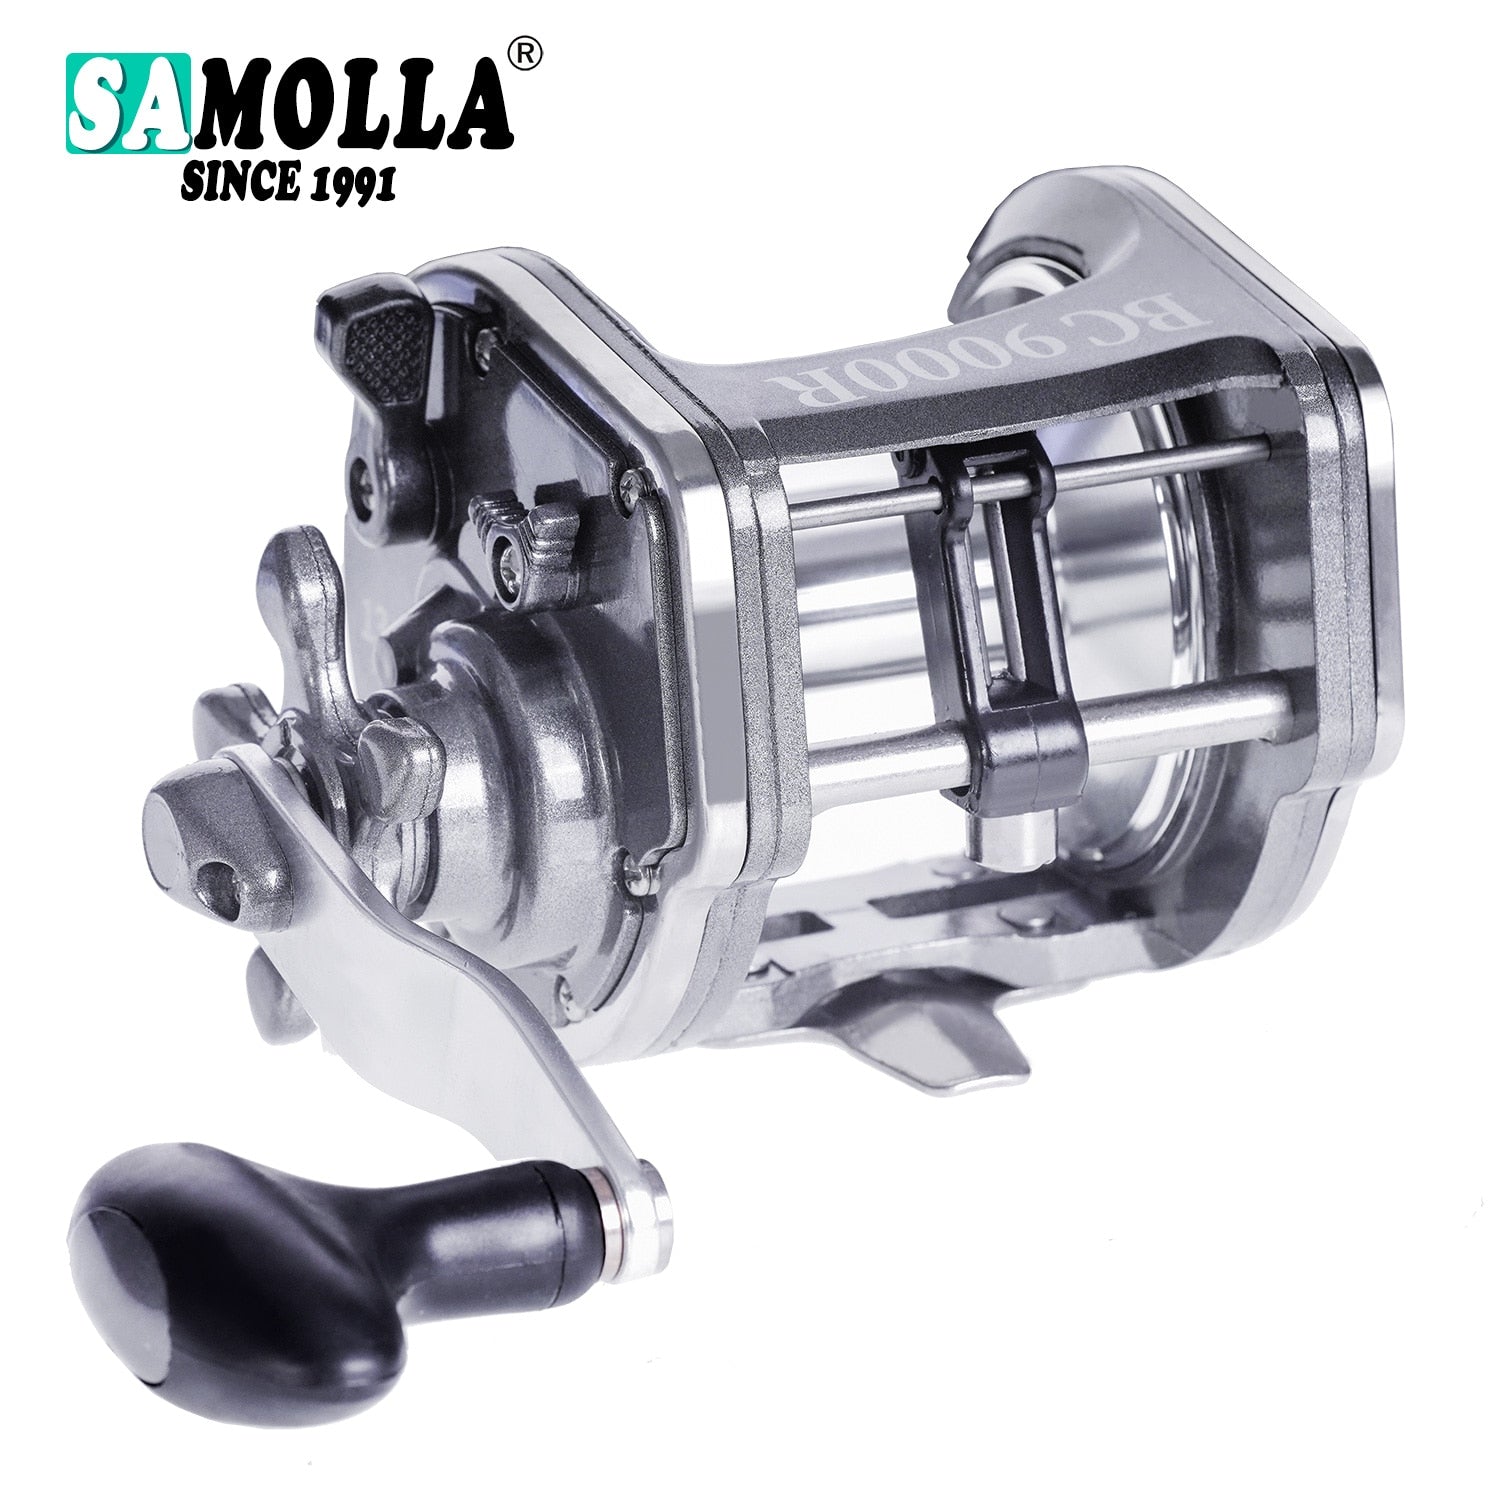  Samolla Fishing Reels Spinning Coil Accessories Open